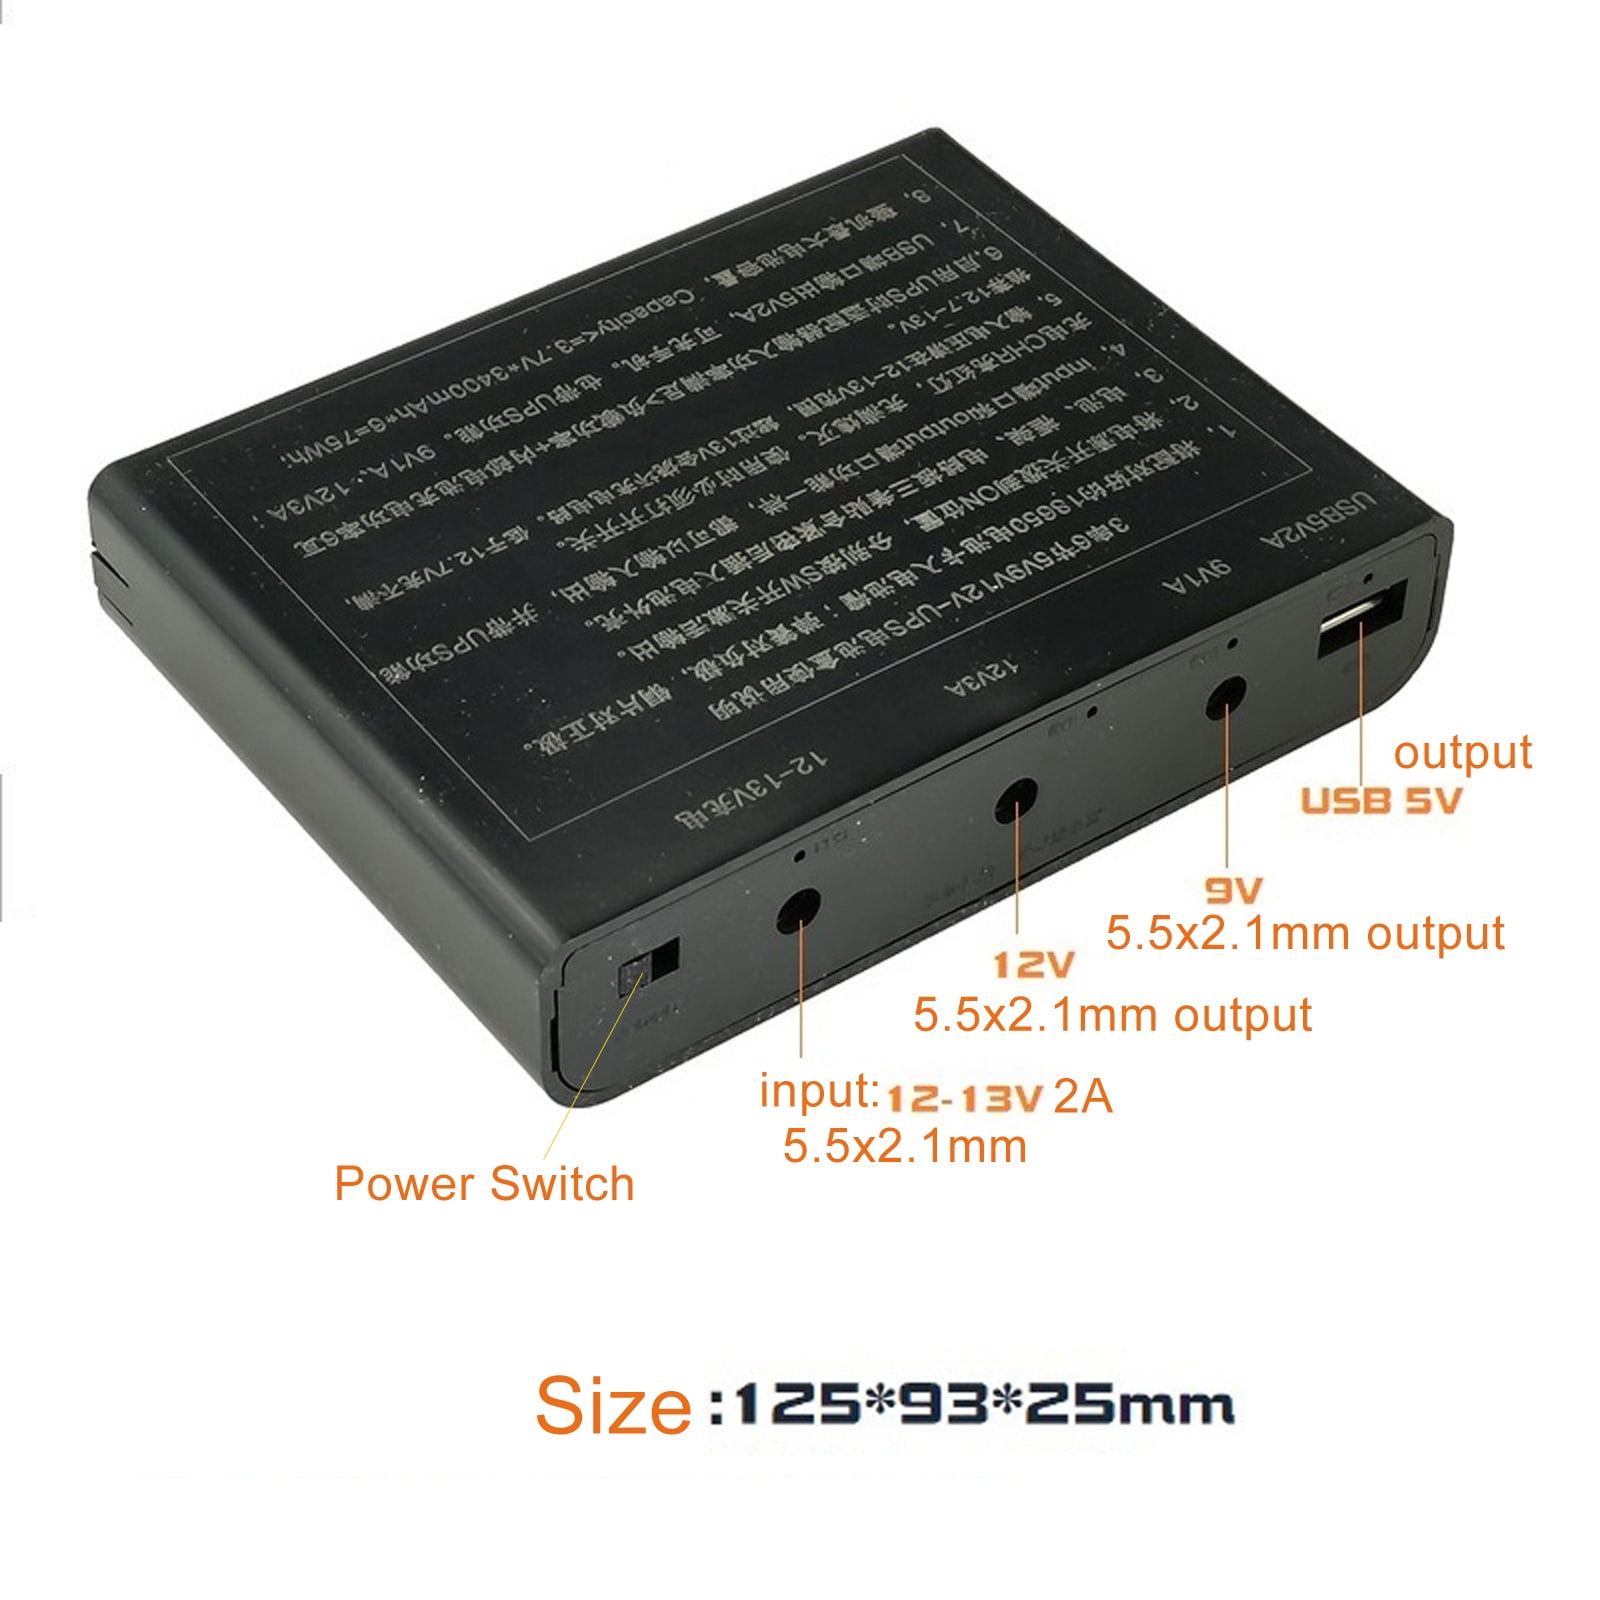 SPARKOLE 12V Battery Pack Rechargeable 5200mAh Lithium Ion Battery for LED  Strip/CCTV Camera/Electronic Organ/Optical Network Unit/Router,Portable 12